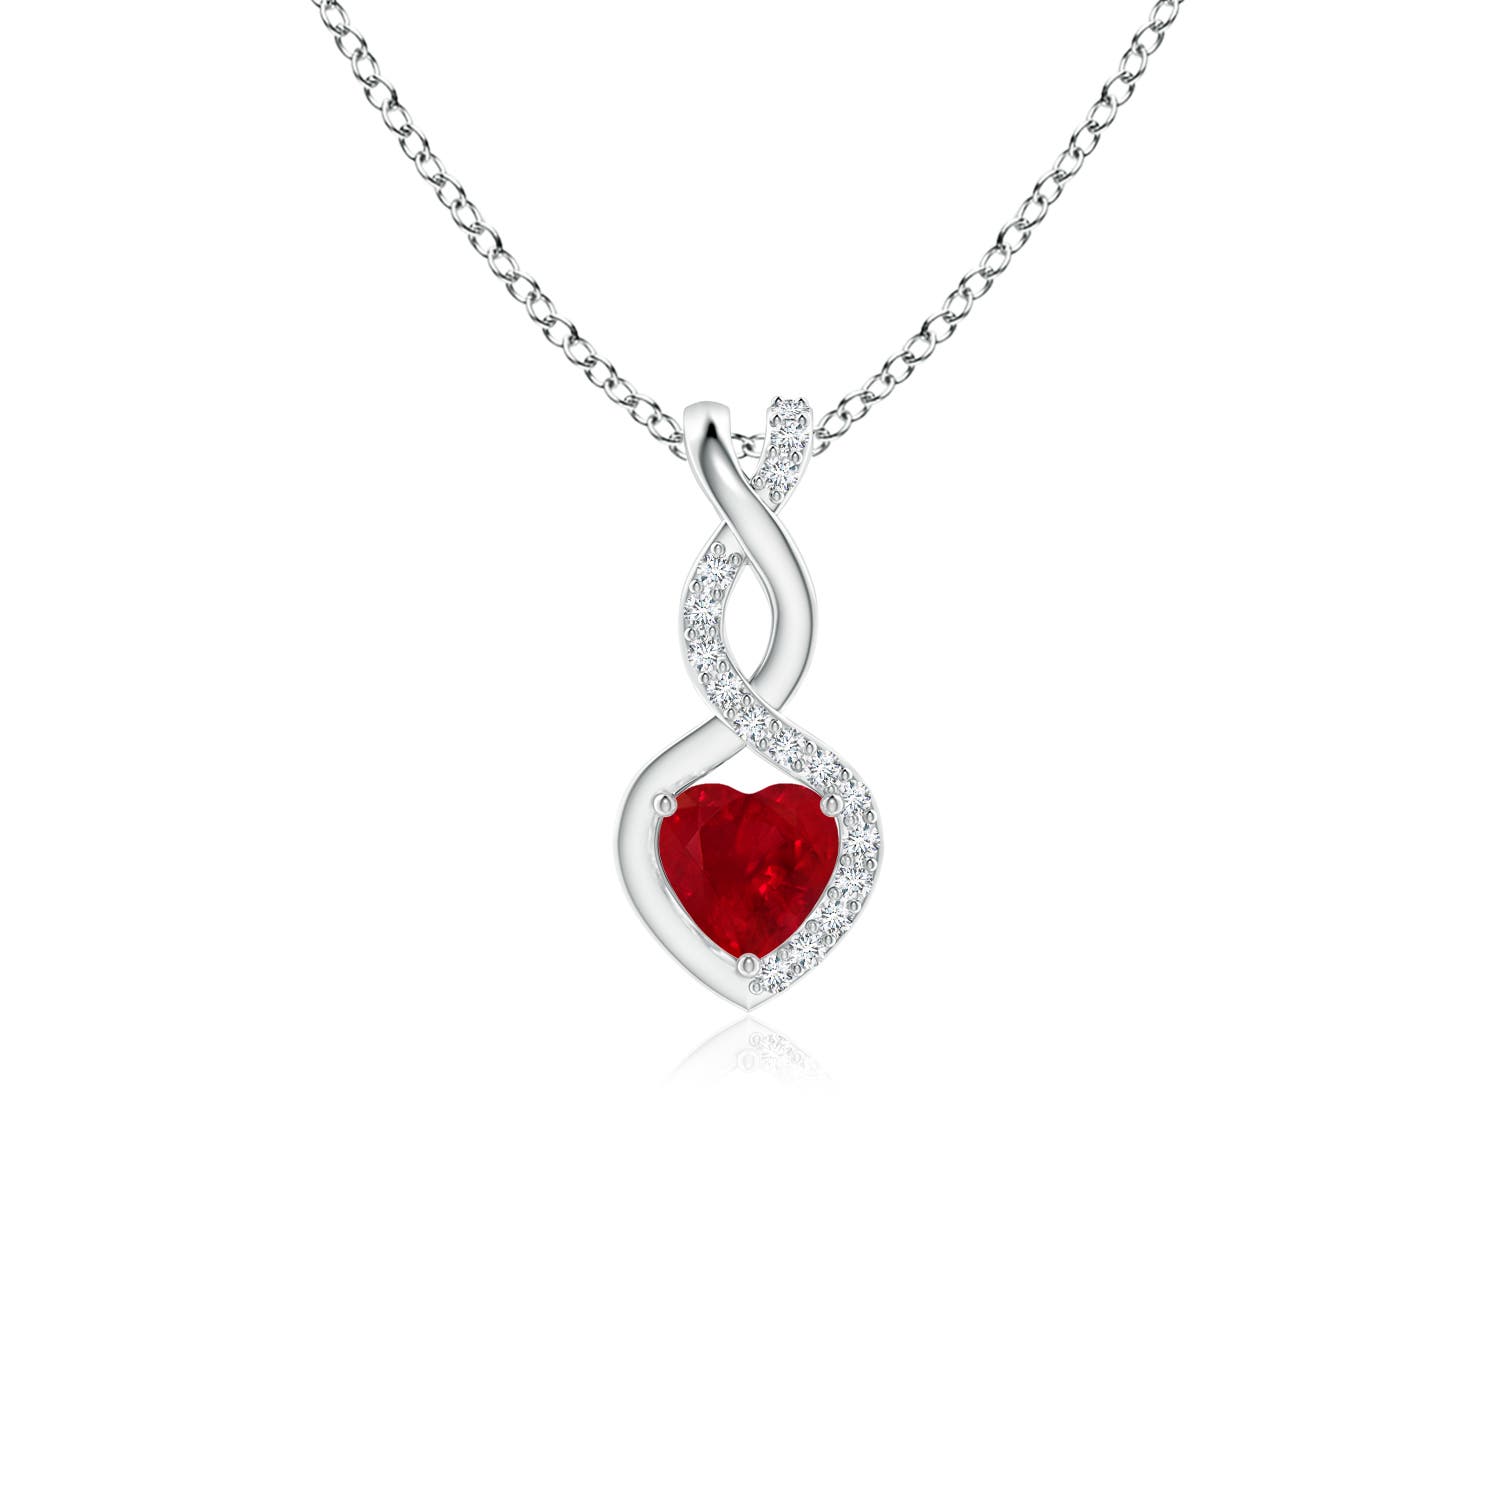 AAA - Ruby / 0.35 CT / 14 KT White Gold